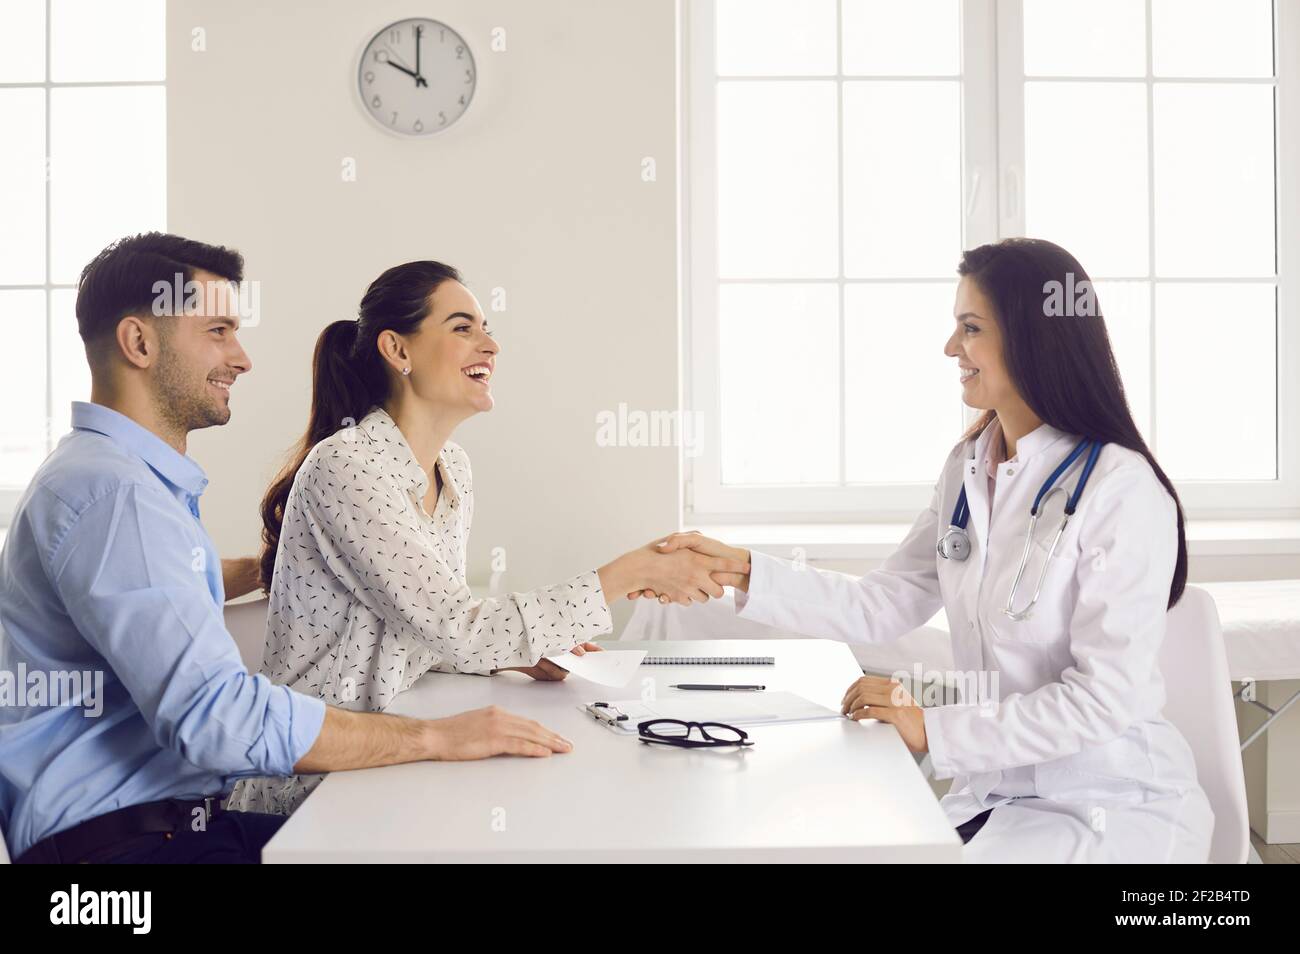 Happy woman patient giving gratitude handshake to doctor during appointment Stock Photo